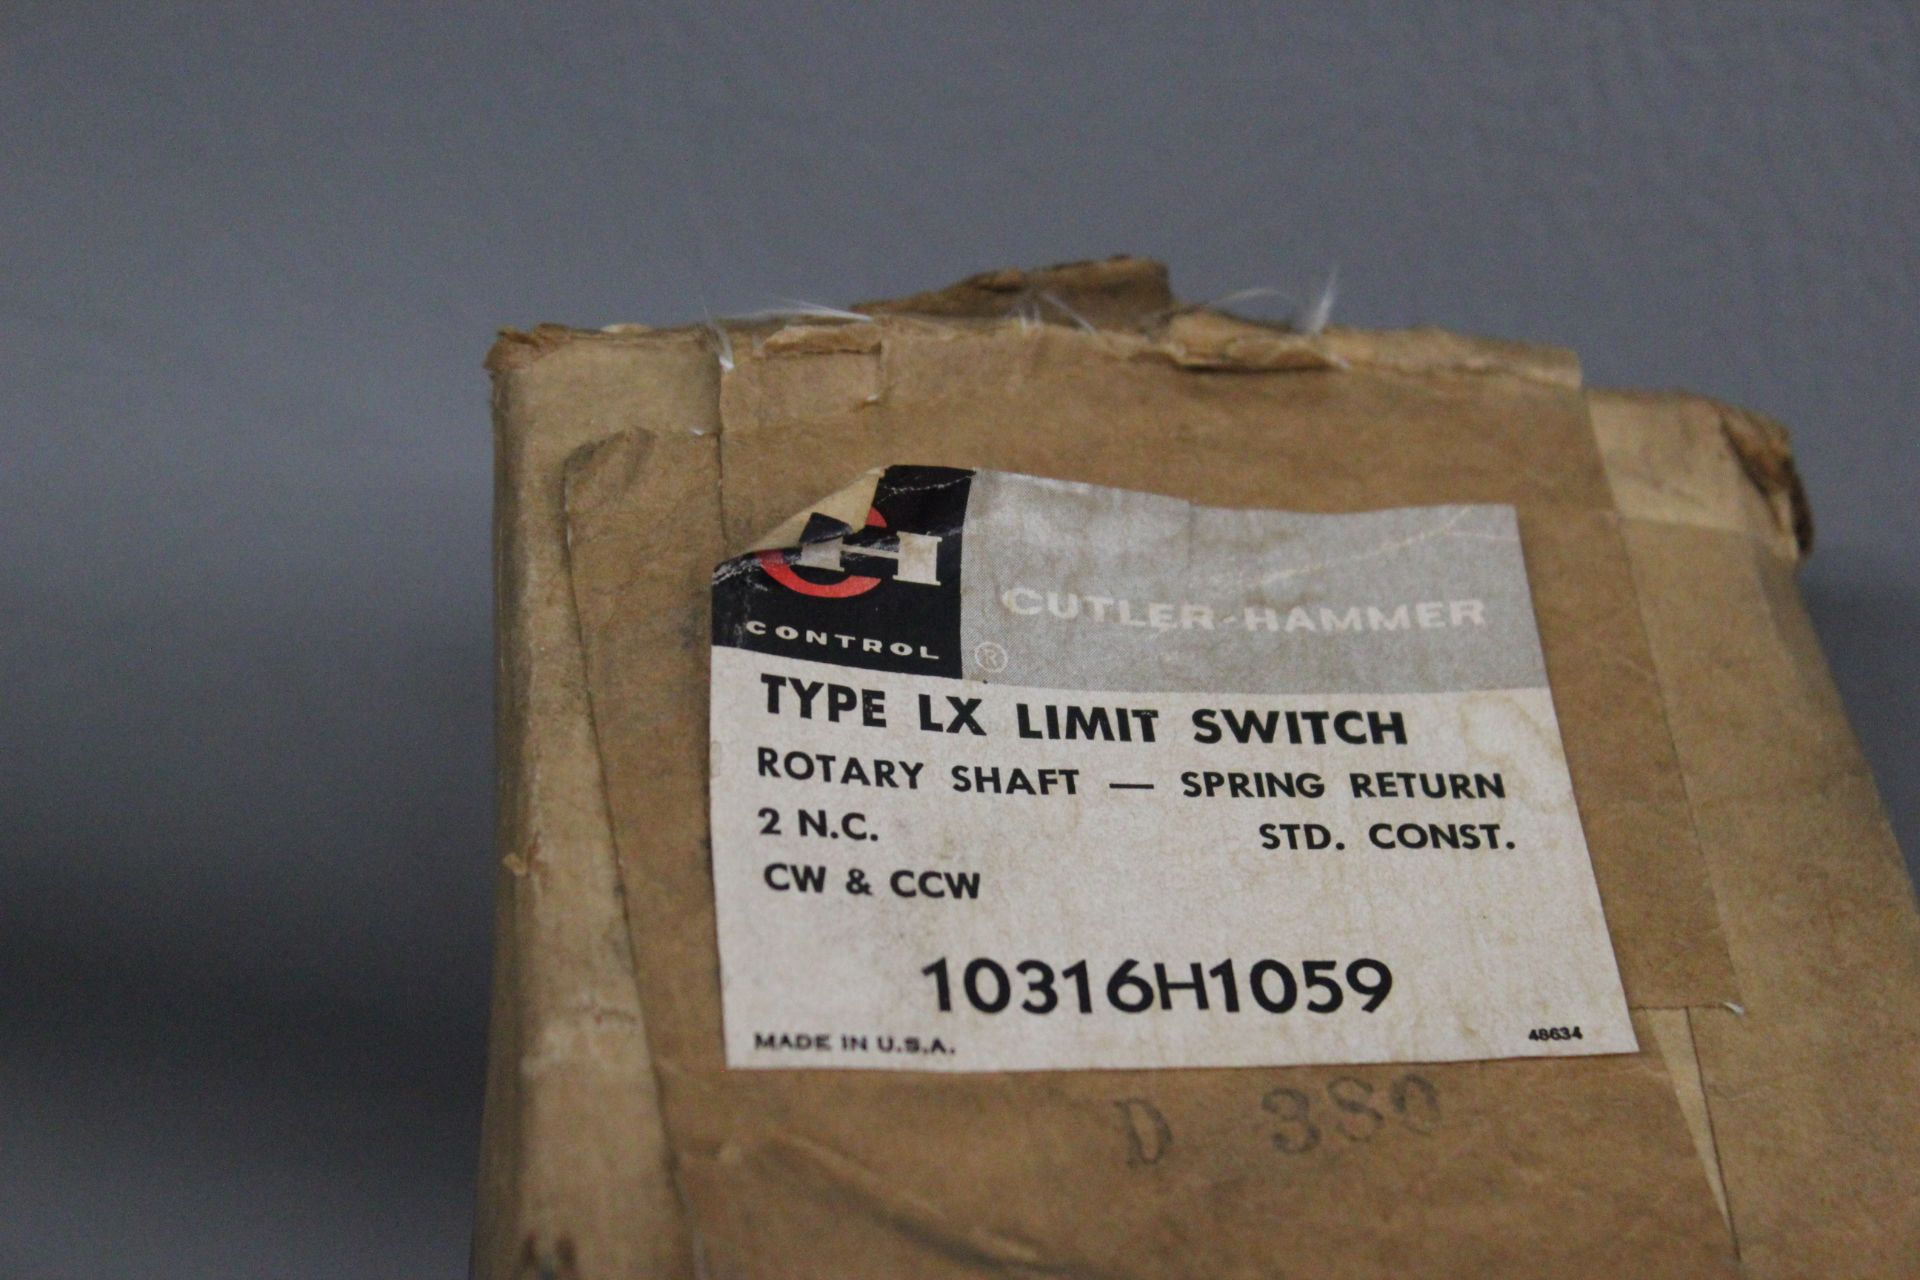 NEW OLD STOCK CUTLER HAMMER TYPE LX LIMIT SWITCH - Image 2 of 5